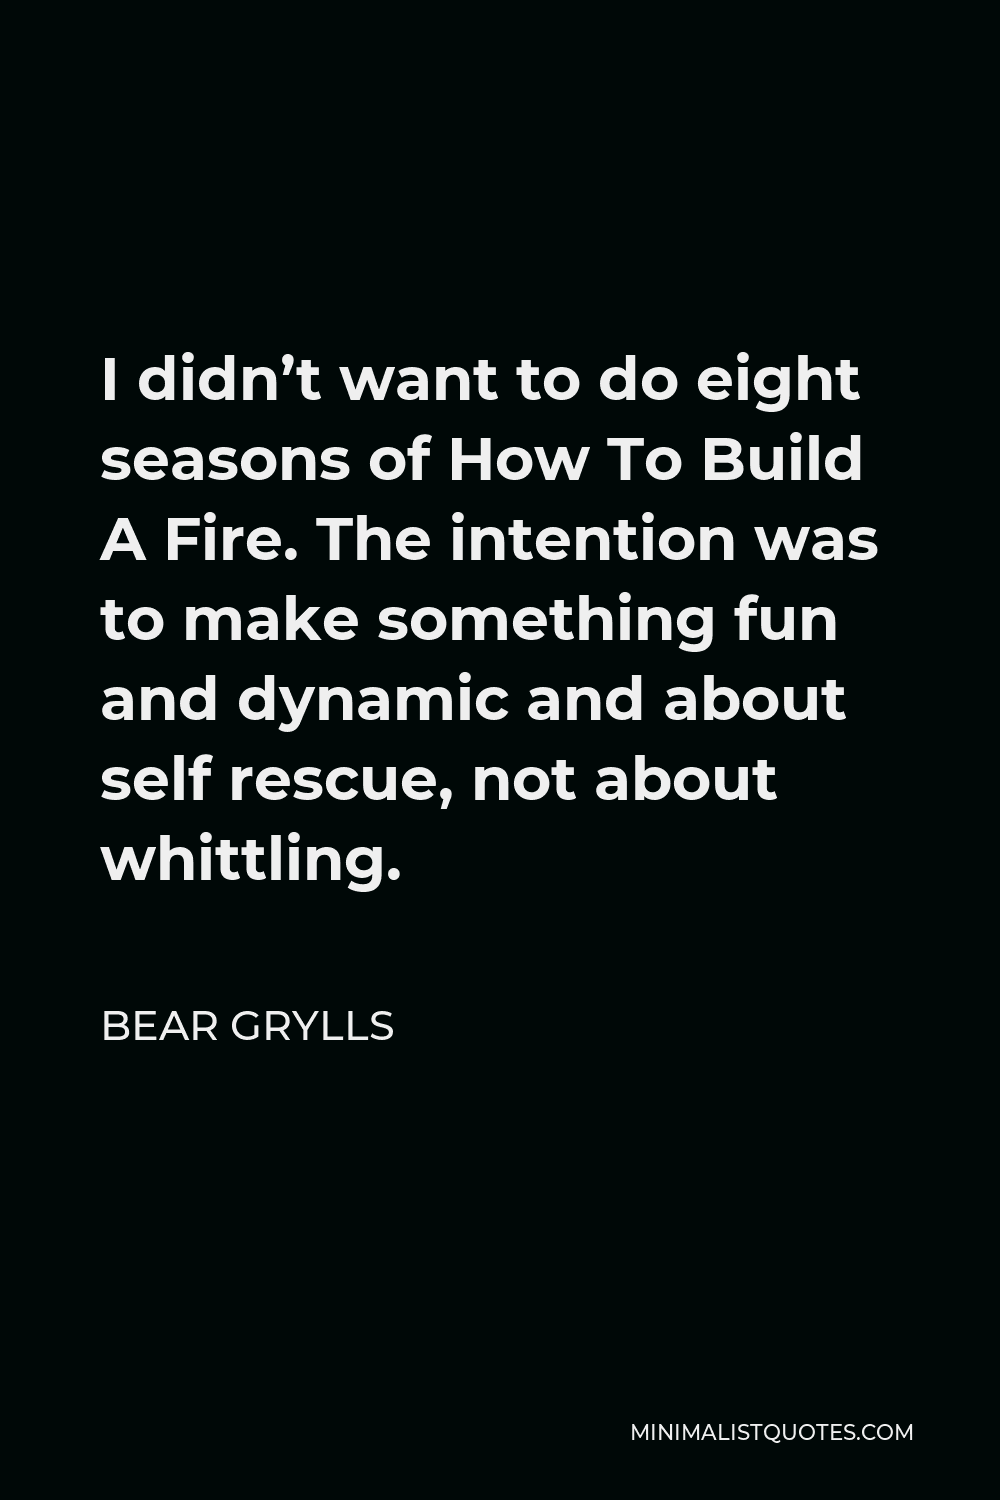 Bear Grylls Quote - I didn’t want to do eight seasons of How To Build A Fire. The intention was to make something fun and dynamic and about self rescue, not about whittling.